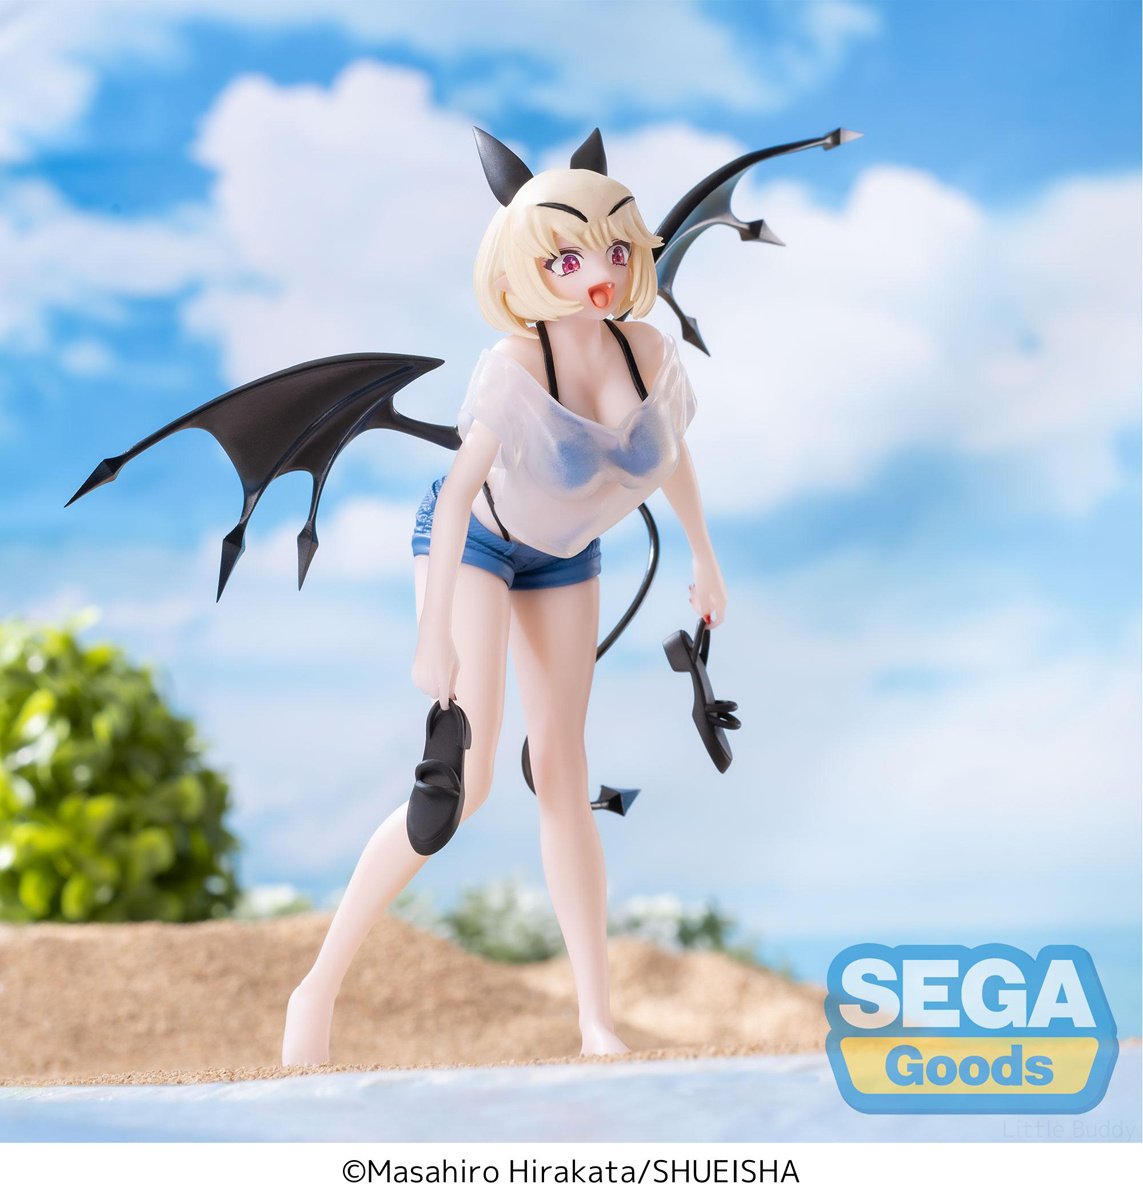 [PREORDER] Luminasta "Debby the Corsifa is Emulous" "Debby the Corsifa" Swimsuit Ver.